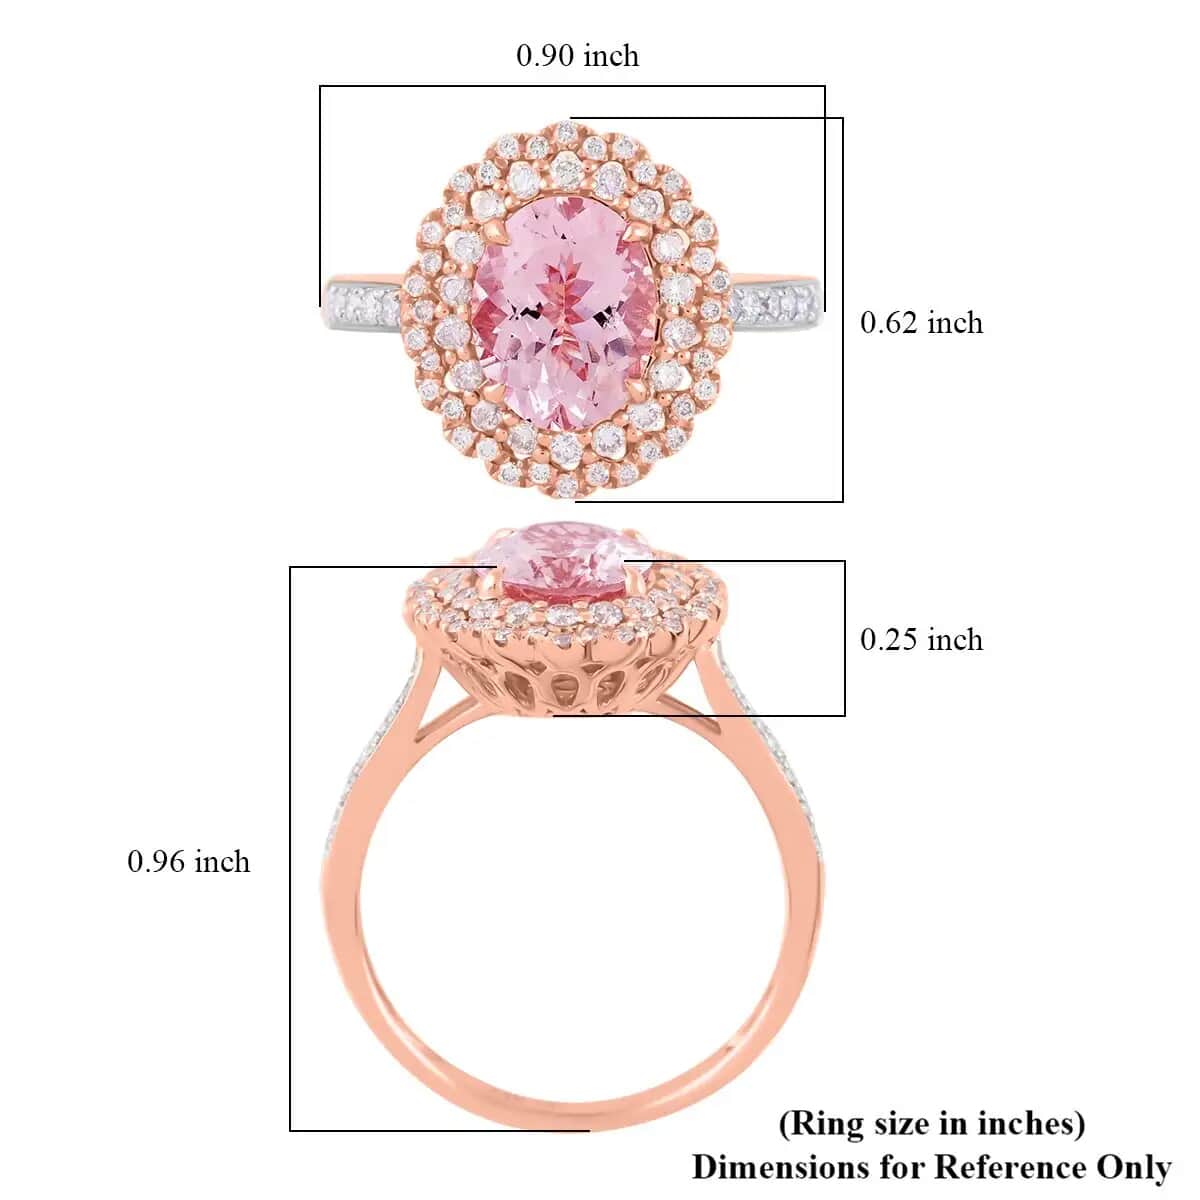 Ankur Treasure Chest Modani Marropino Morganite Ring, 14K Rose Gold Ring, Diamond Floral Halo Ring, Natural Pink And White Diamond Accent Ring, Promise Rings 1.95 ctw (Size 7.0) image number 6